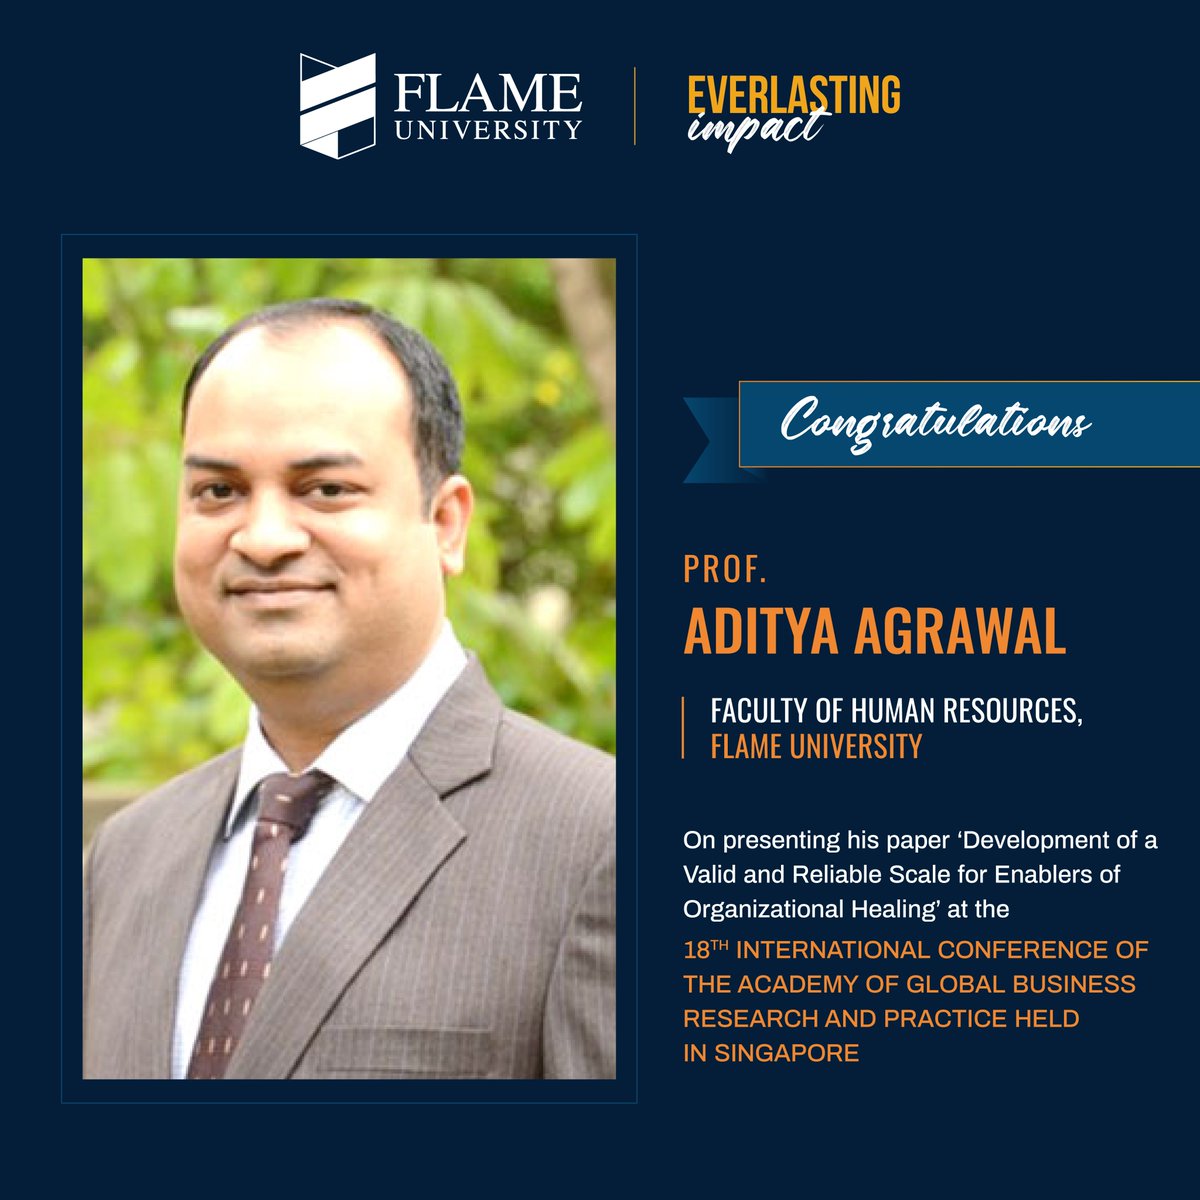 Congratulations to Prof. Aditya Agrawal, Faculty of Human Resources, FLAME University, on presenting his paper ‘Development of a Valid and Reliable Scale for Enablers of Organizational Healing’ at the 18th International Conference of the Academy of Global Business Research and…